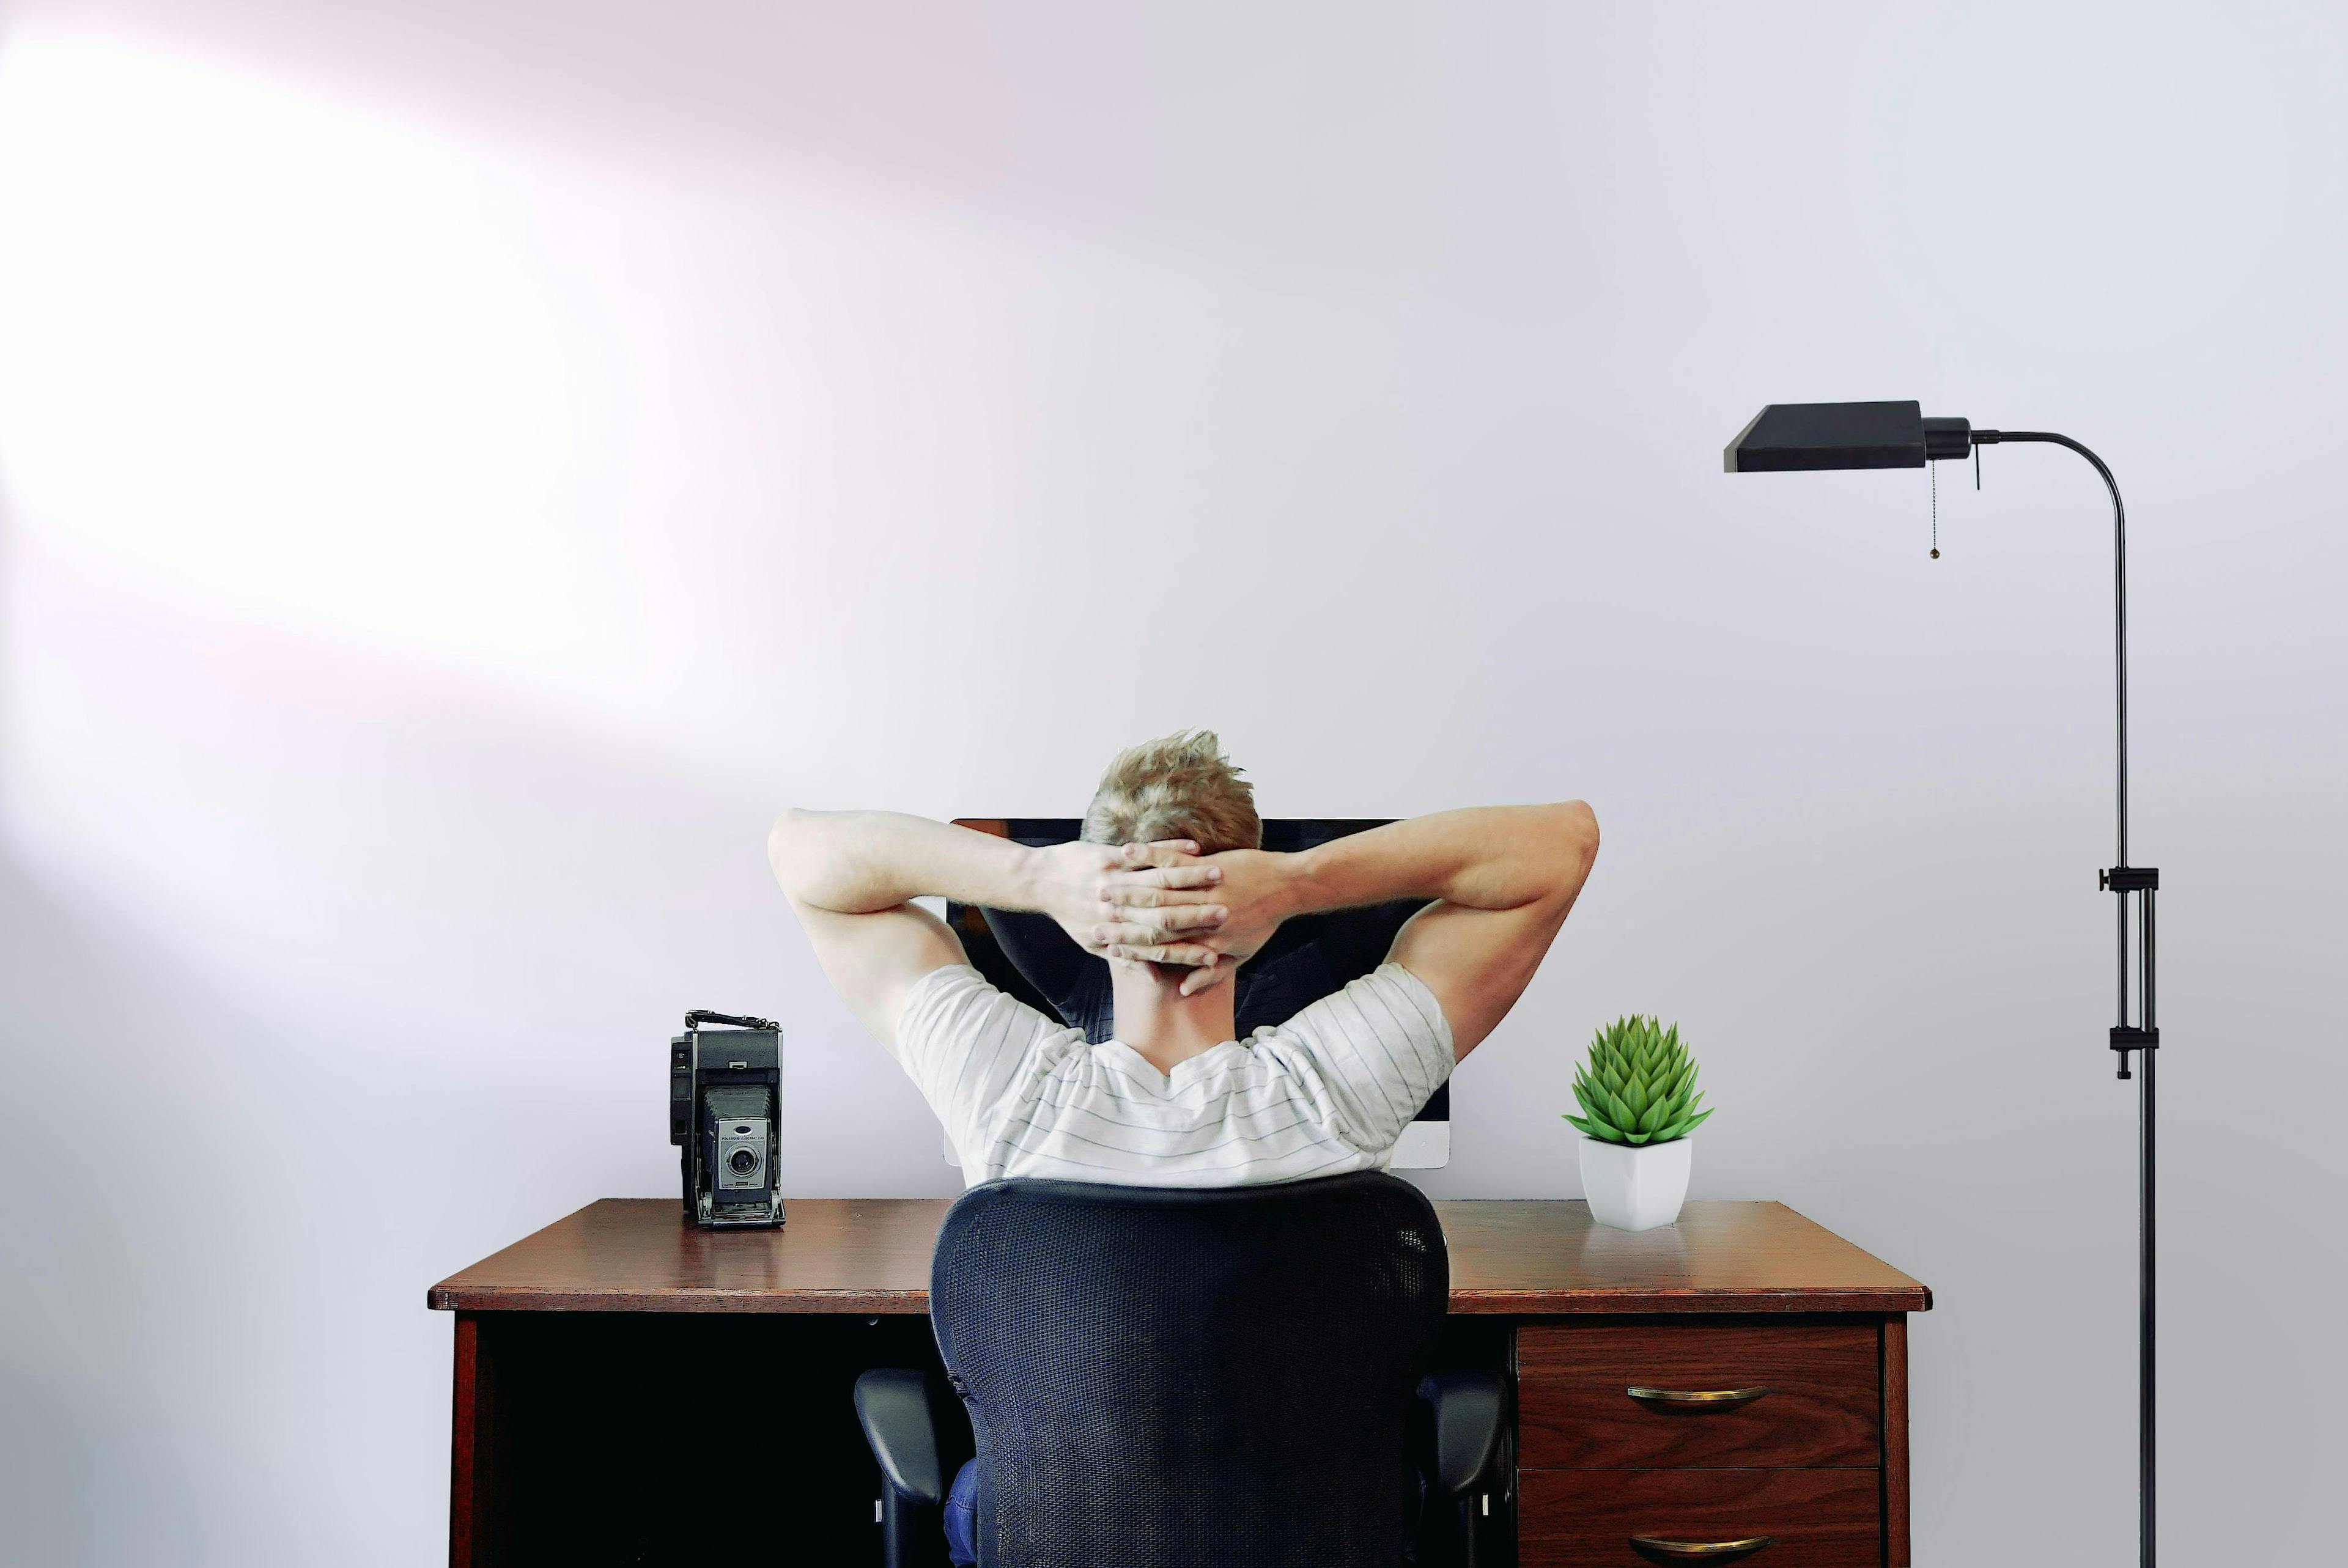 A person is leaning back in a chair with hands behind their head, facing a computer on a wooden desk in a minimalistic office with a plant and a floor lamp.